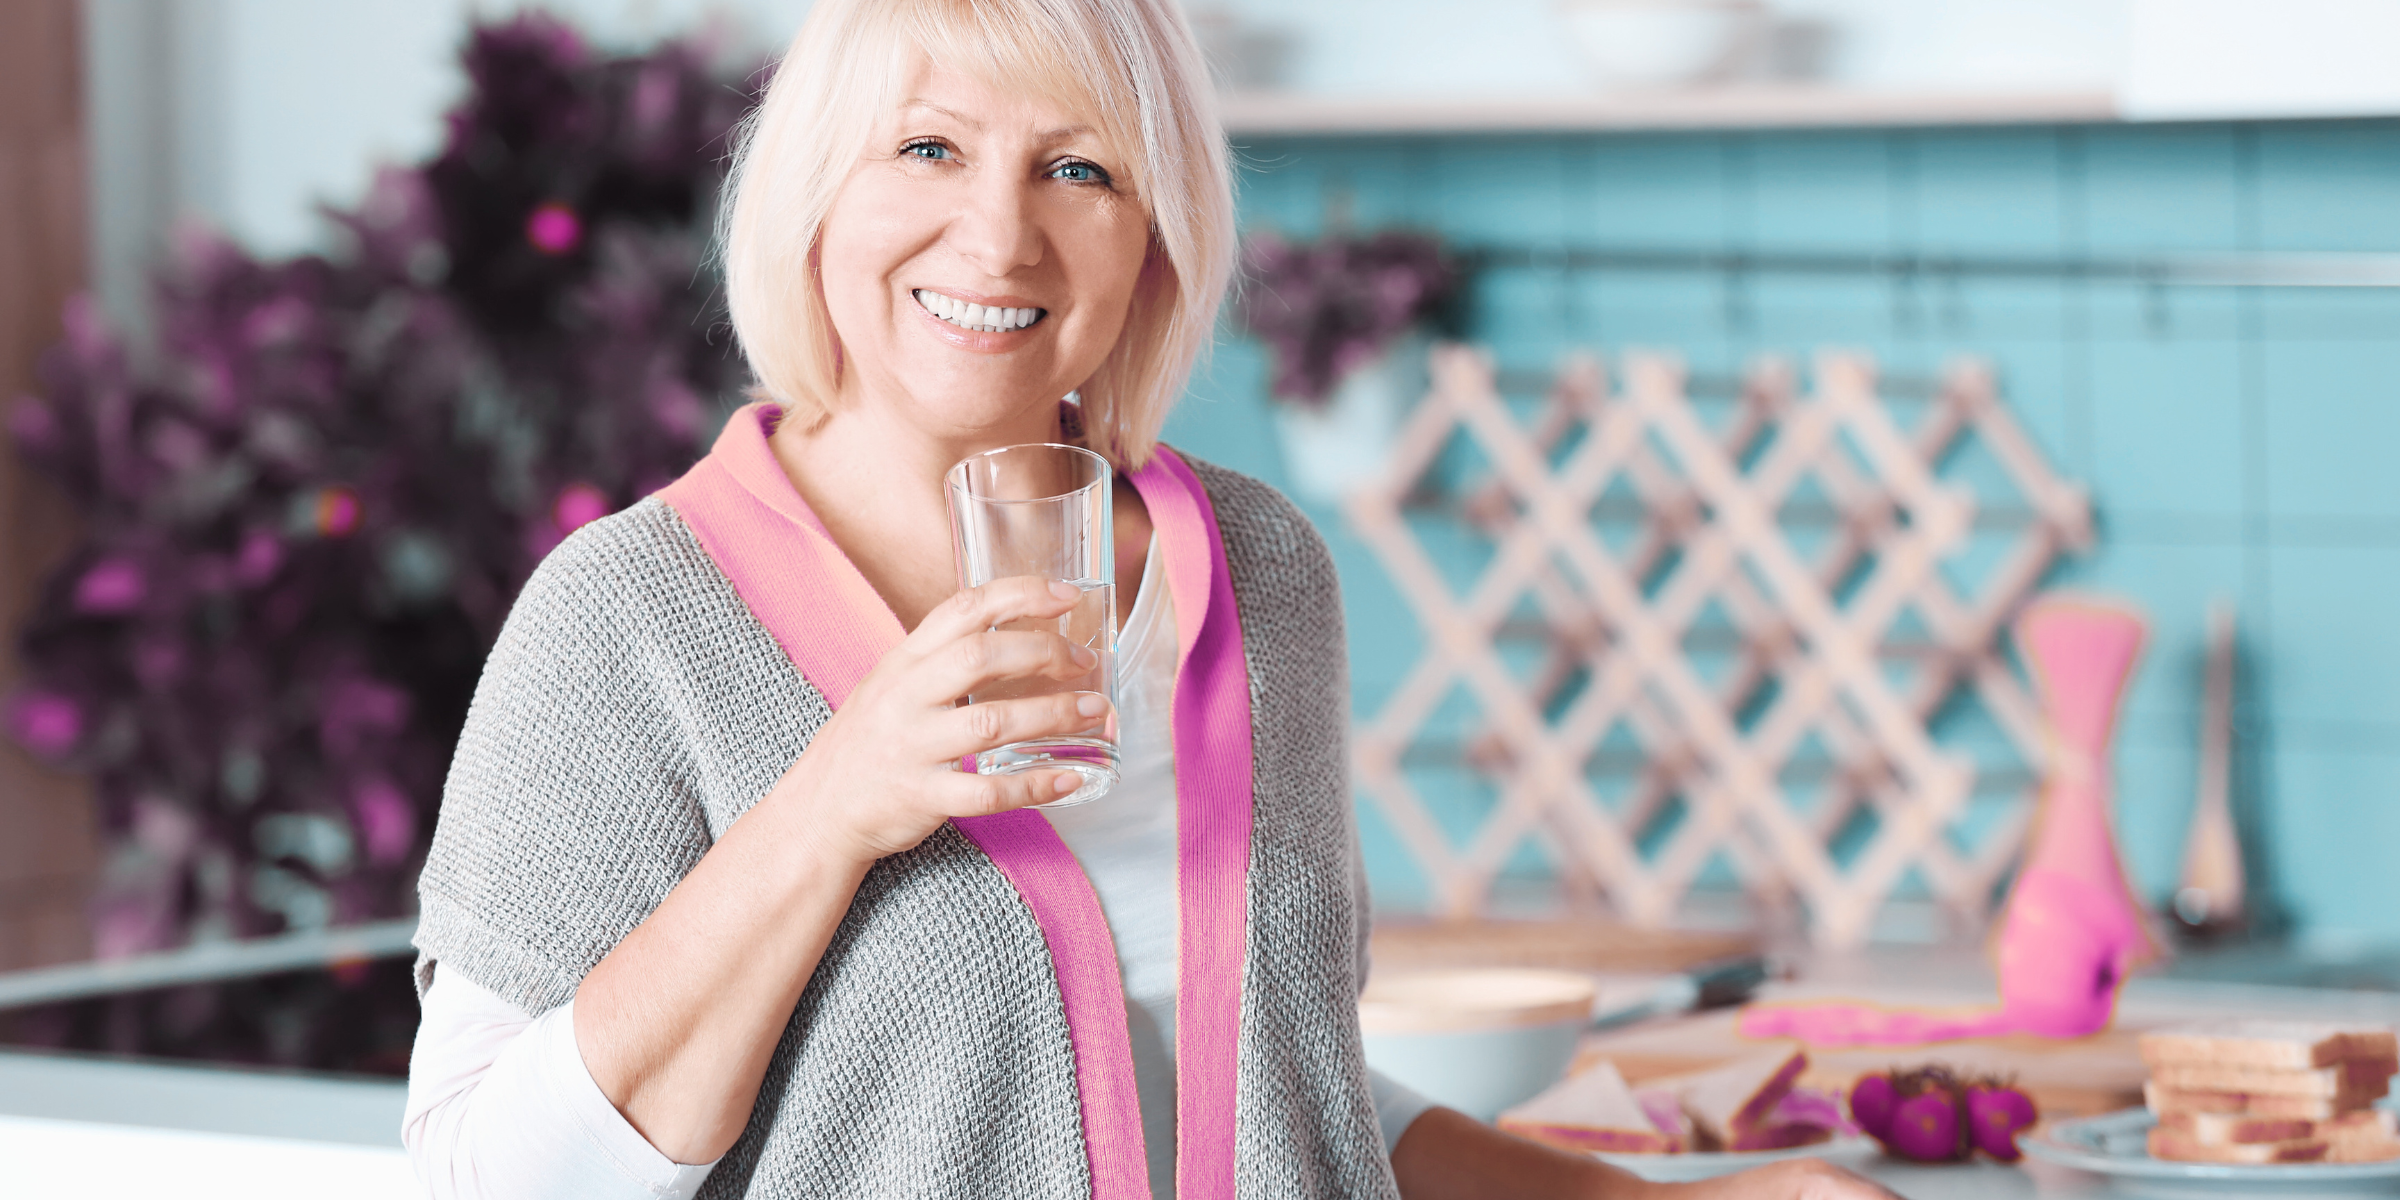 senior woman Stays Hydrated and Avoid Toxins by drinking water instead of soda